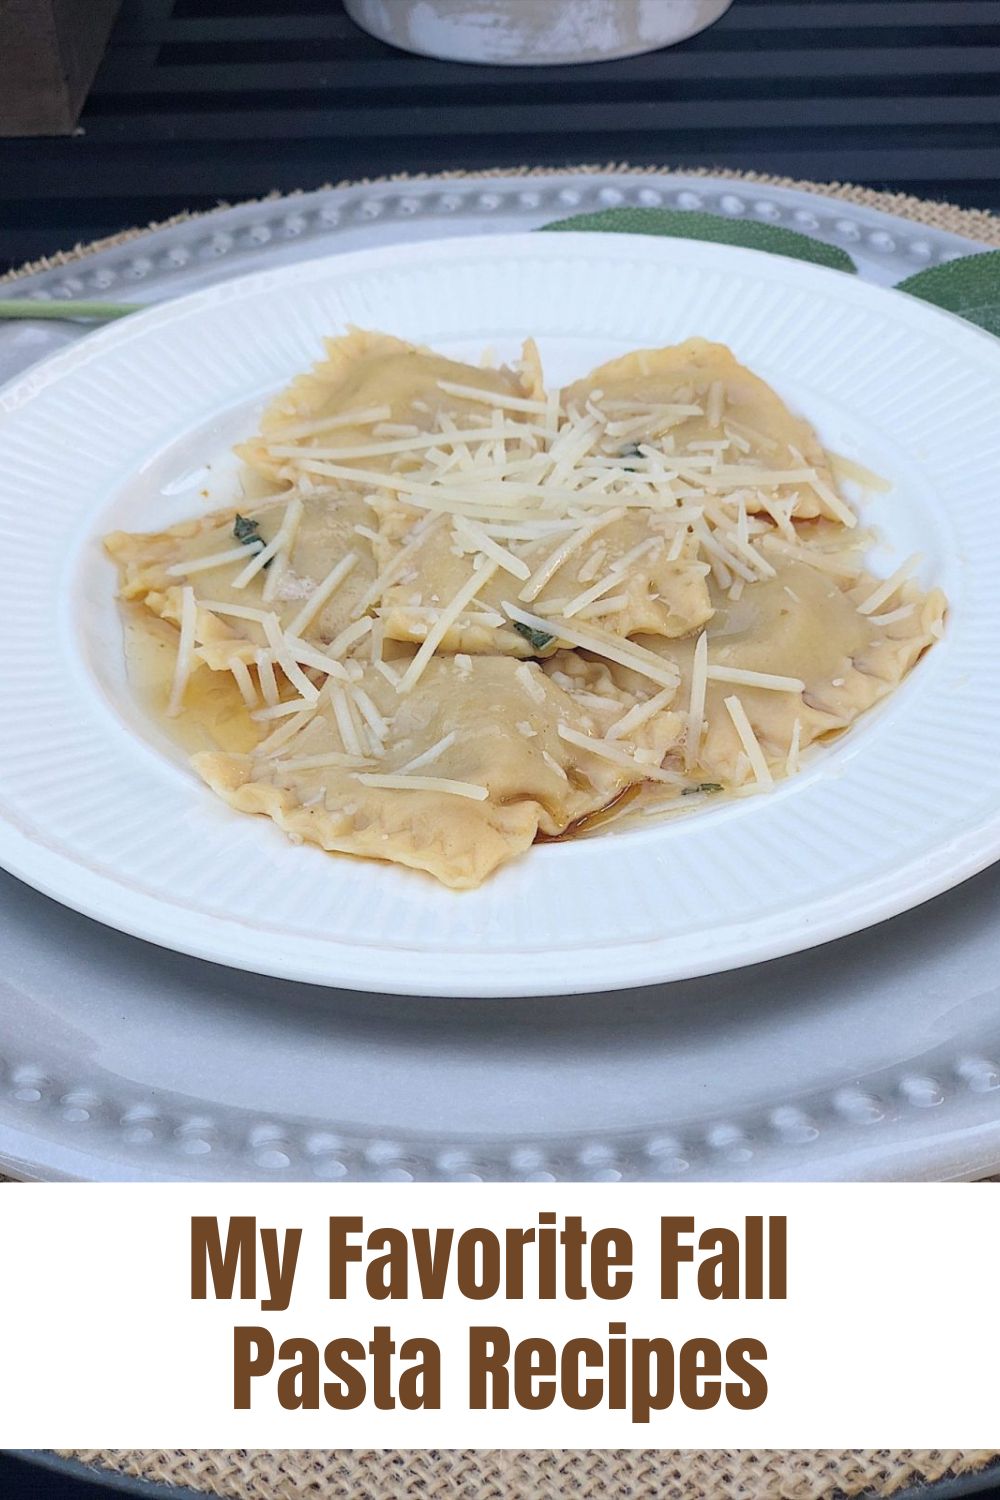 Pasta is one of my favorite things to both make and eat. Today, I am sharing some of my favorite fall pasta recipes.